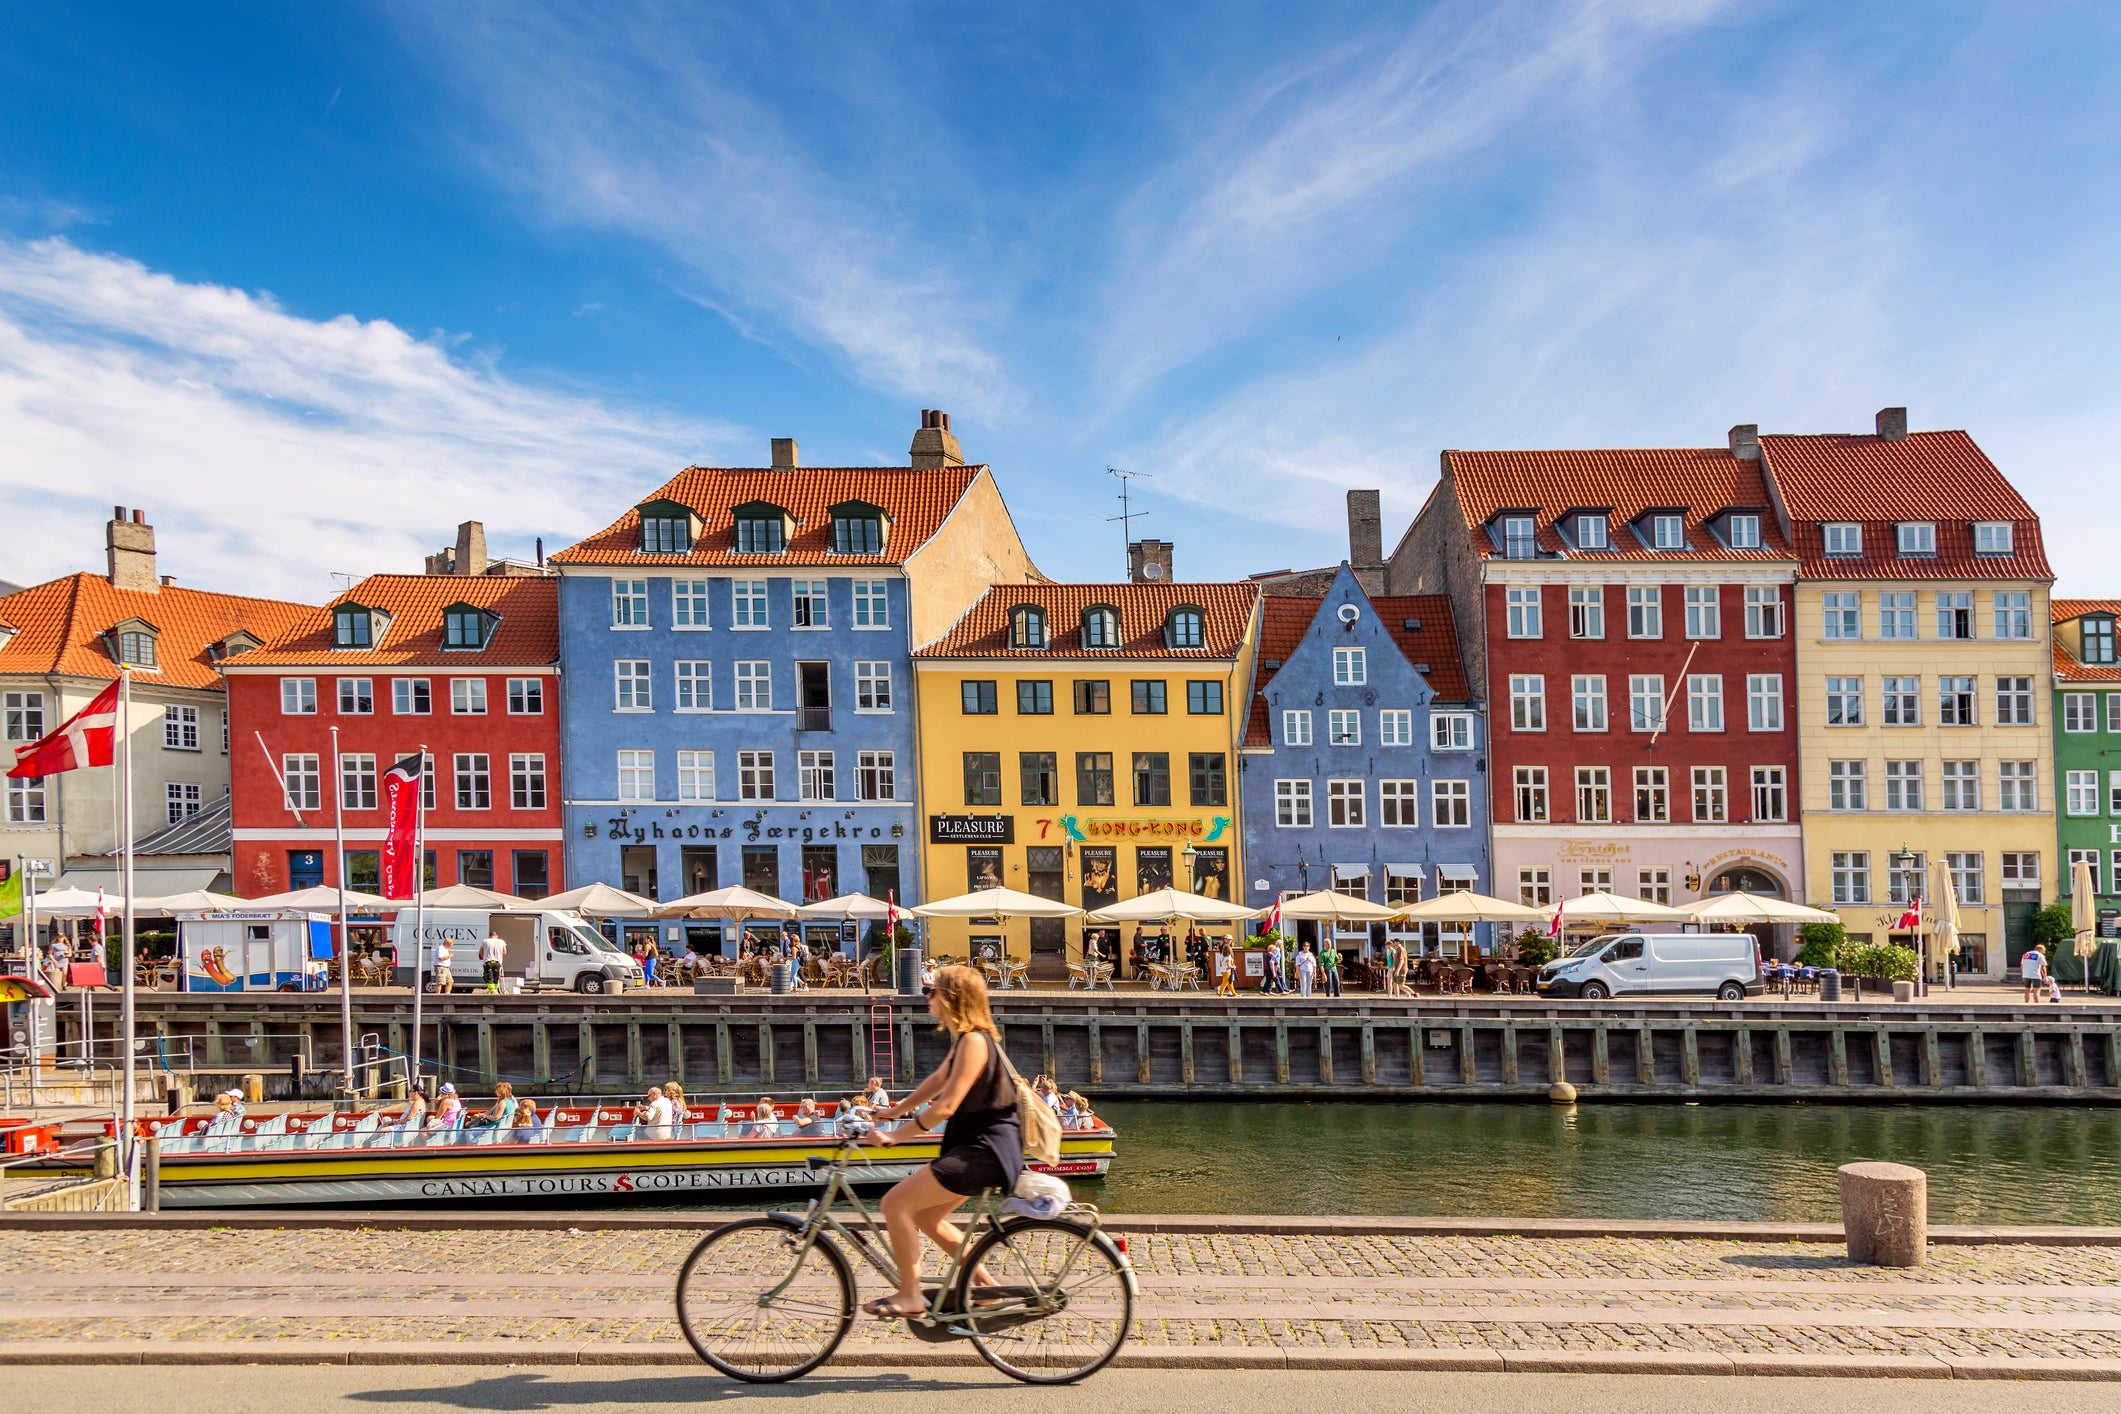 Copenhagen is a walkable city with great transport links to help you get around